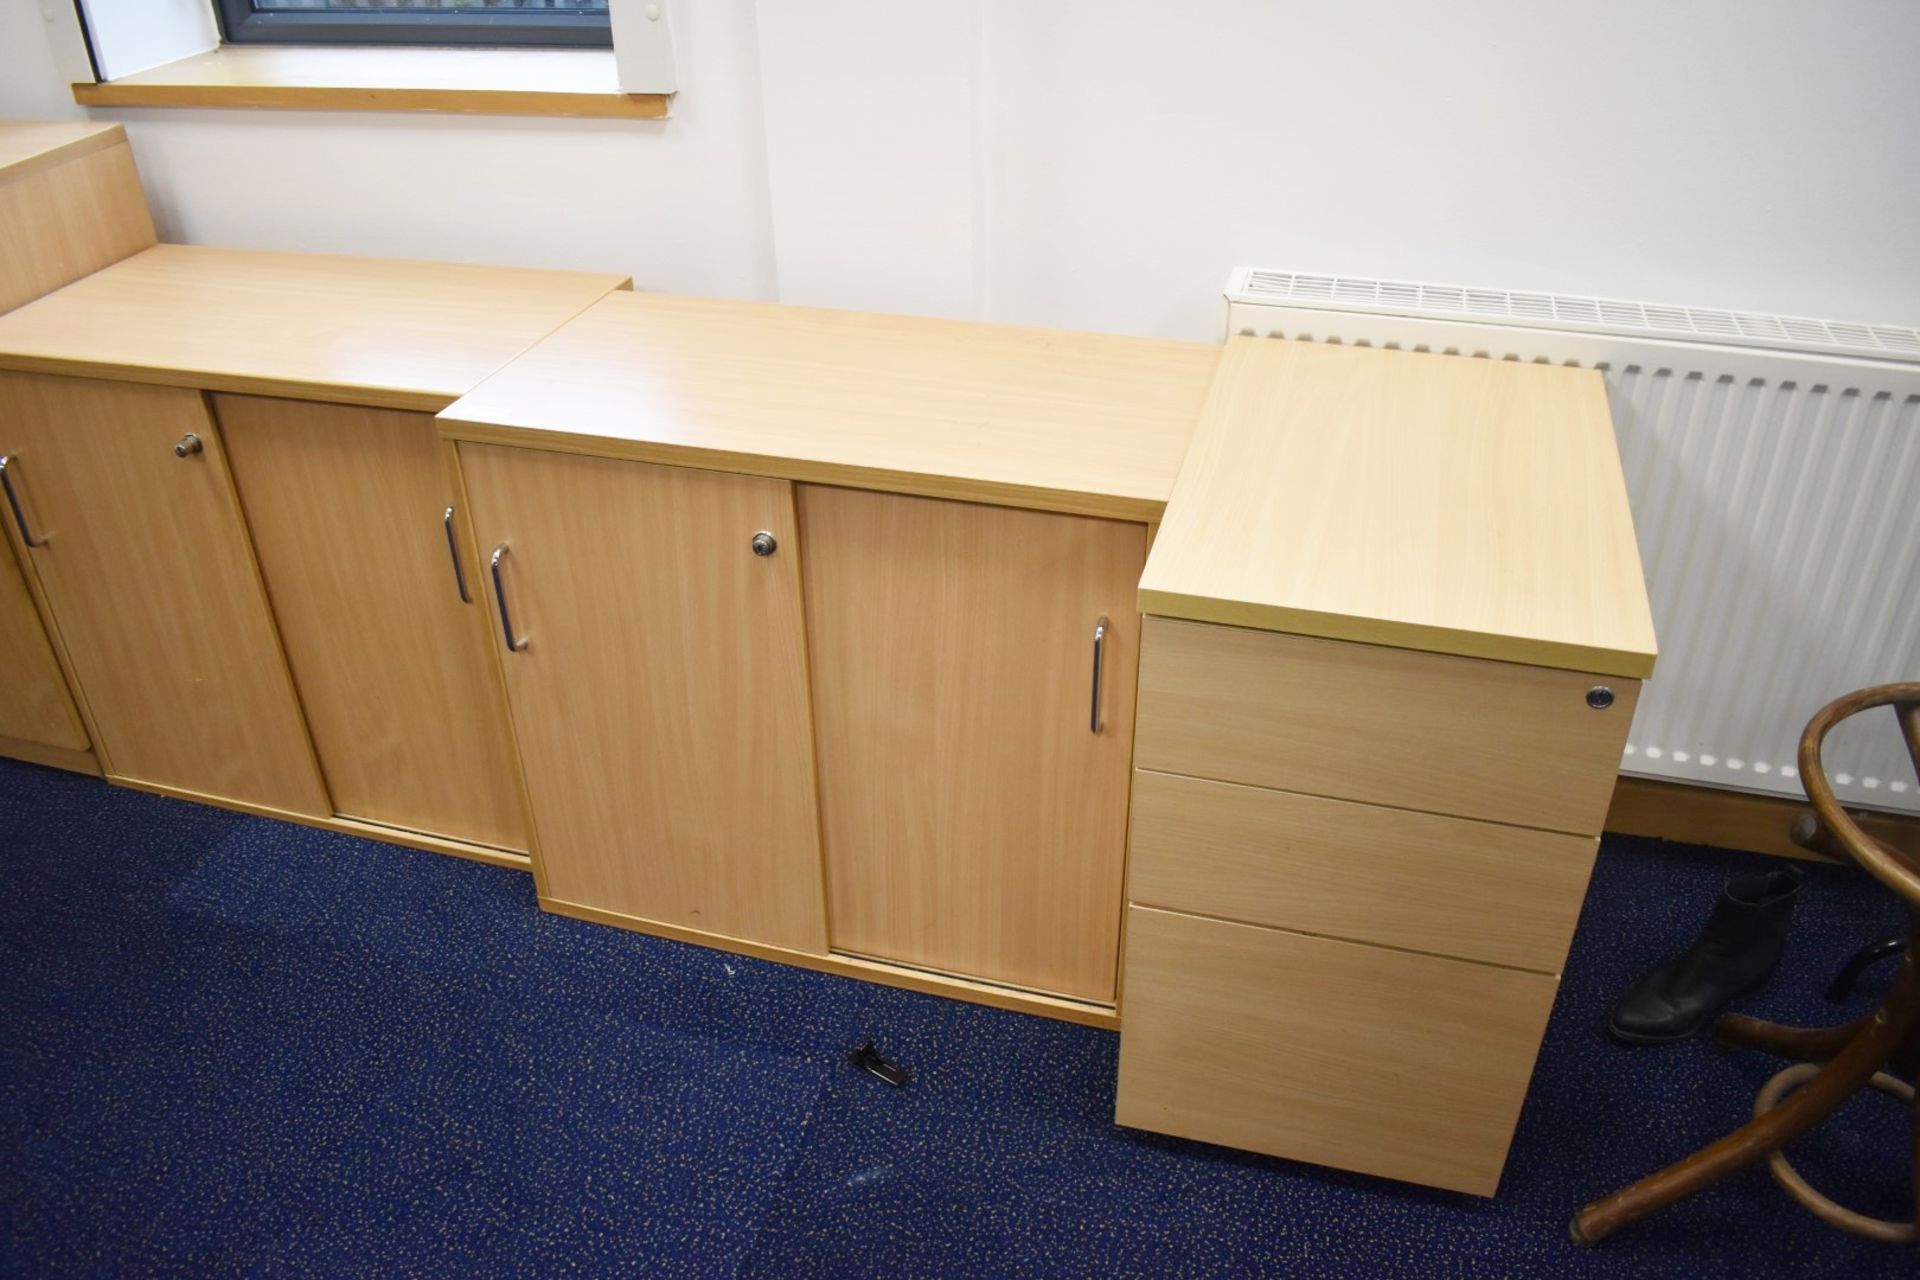 5 x Assorted Office Cabinets - Ref: FF177 D - CL544 - Location: Leeds, LS14Collections:This item - Image 2 of 4